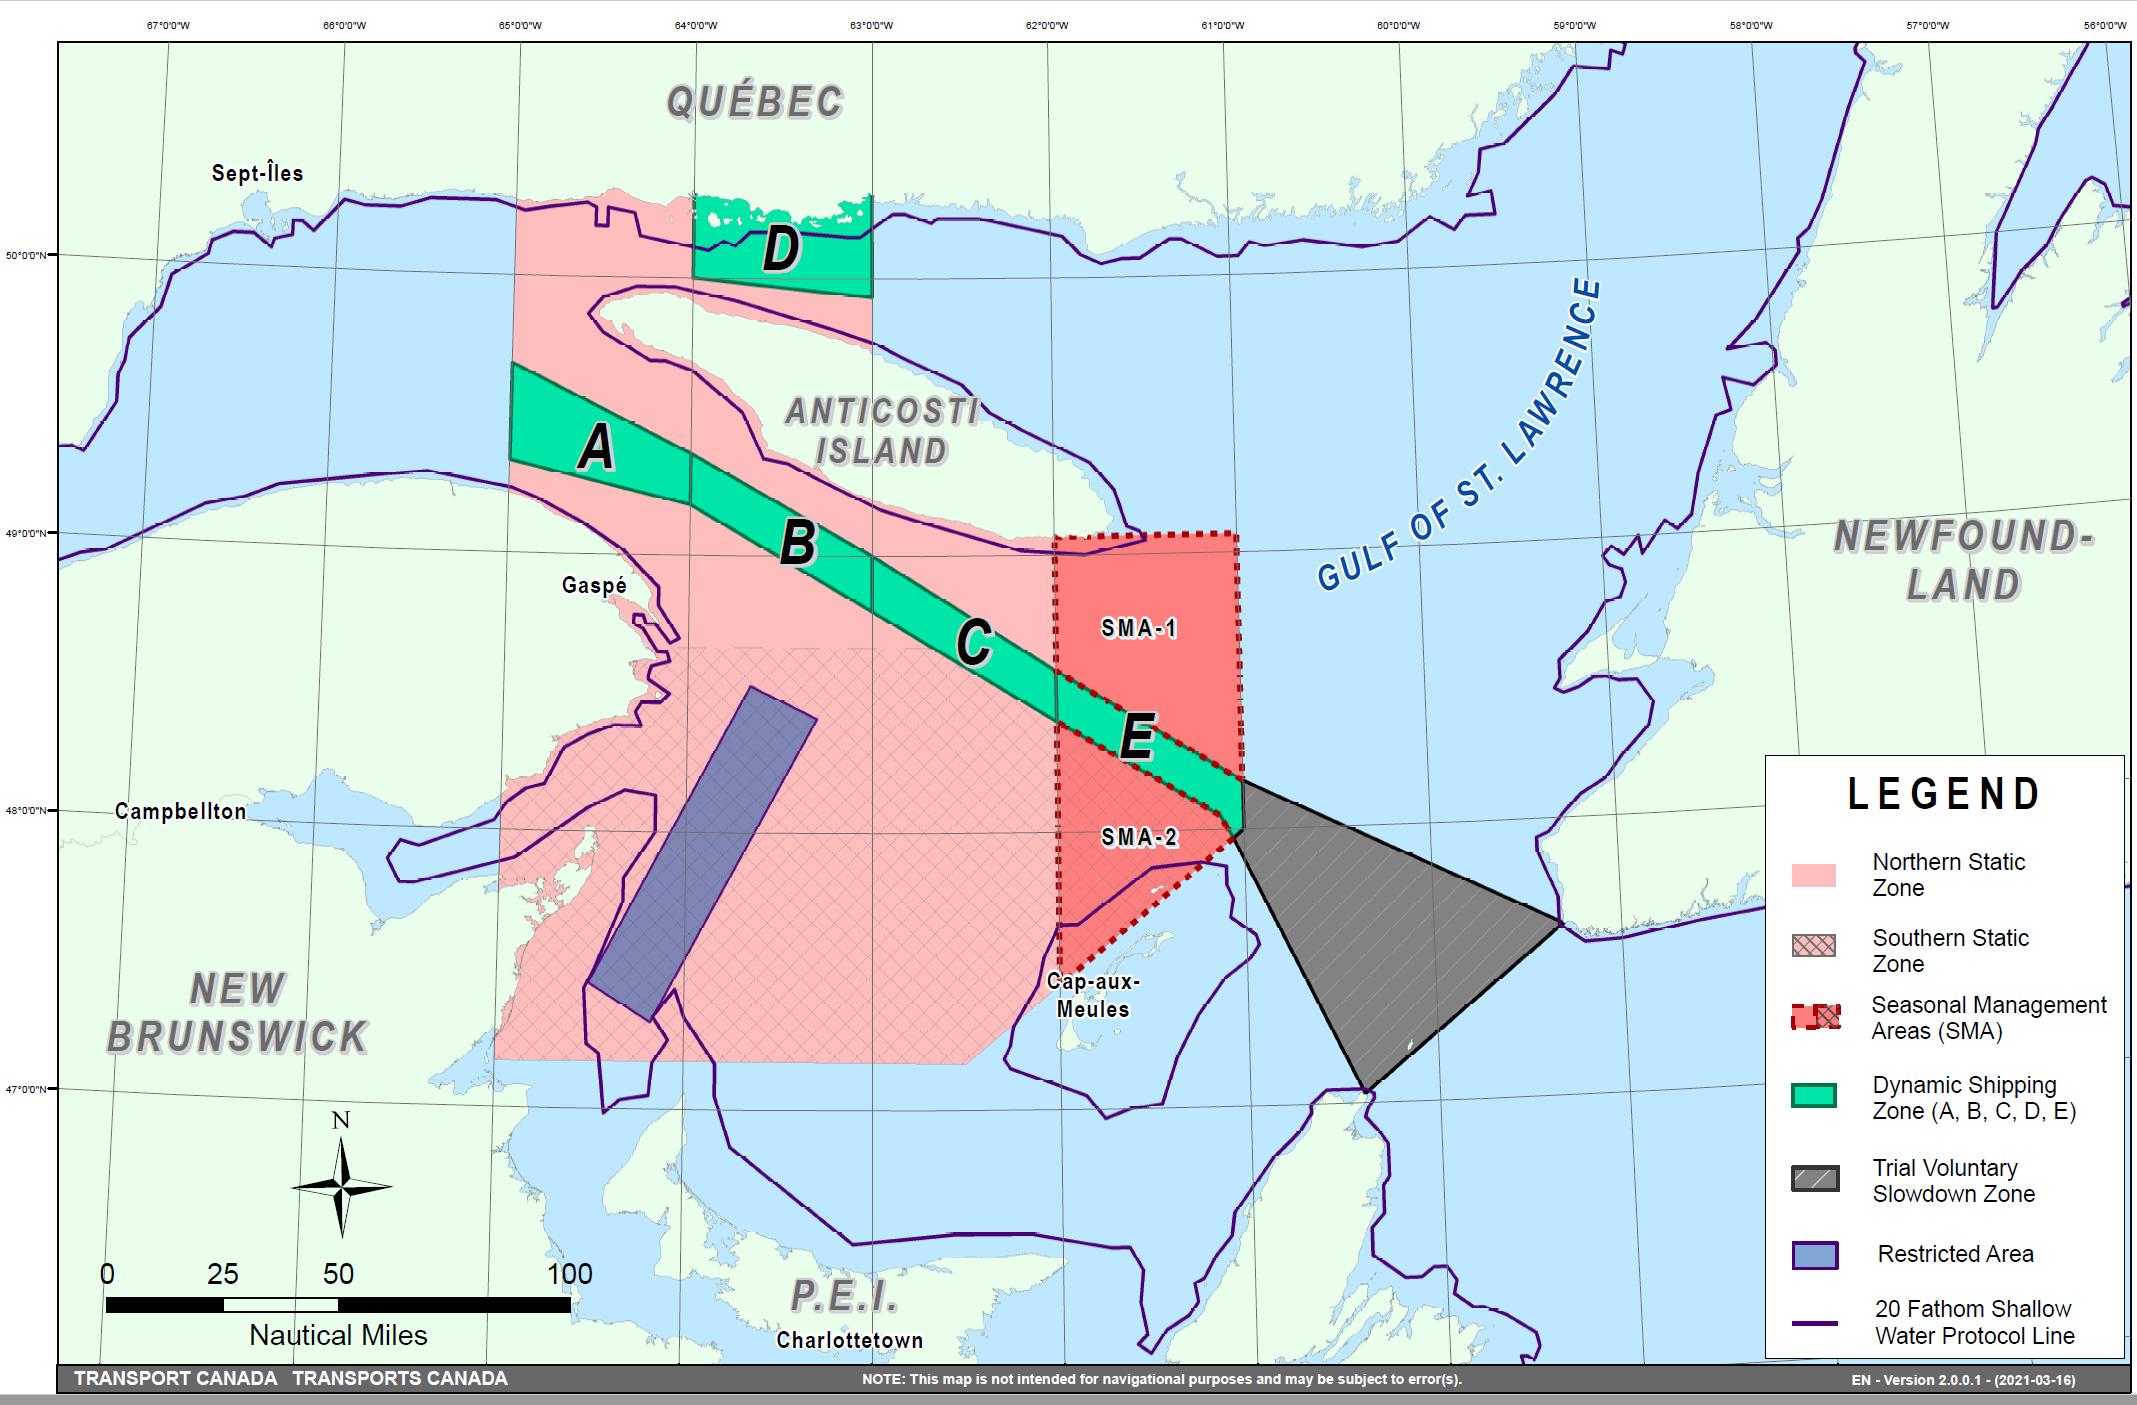 Map showing the static zones, the dynamic shipping zones (A, B, C, D and E), the seasonal management areas, the Shediac Valley restricted area, the 20 fathom shallow water protocol line and the trial voluntary slowdown zone